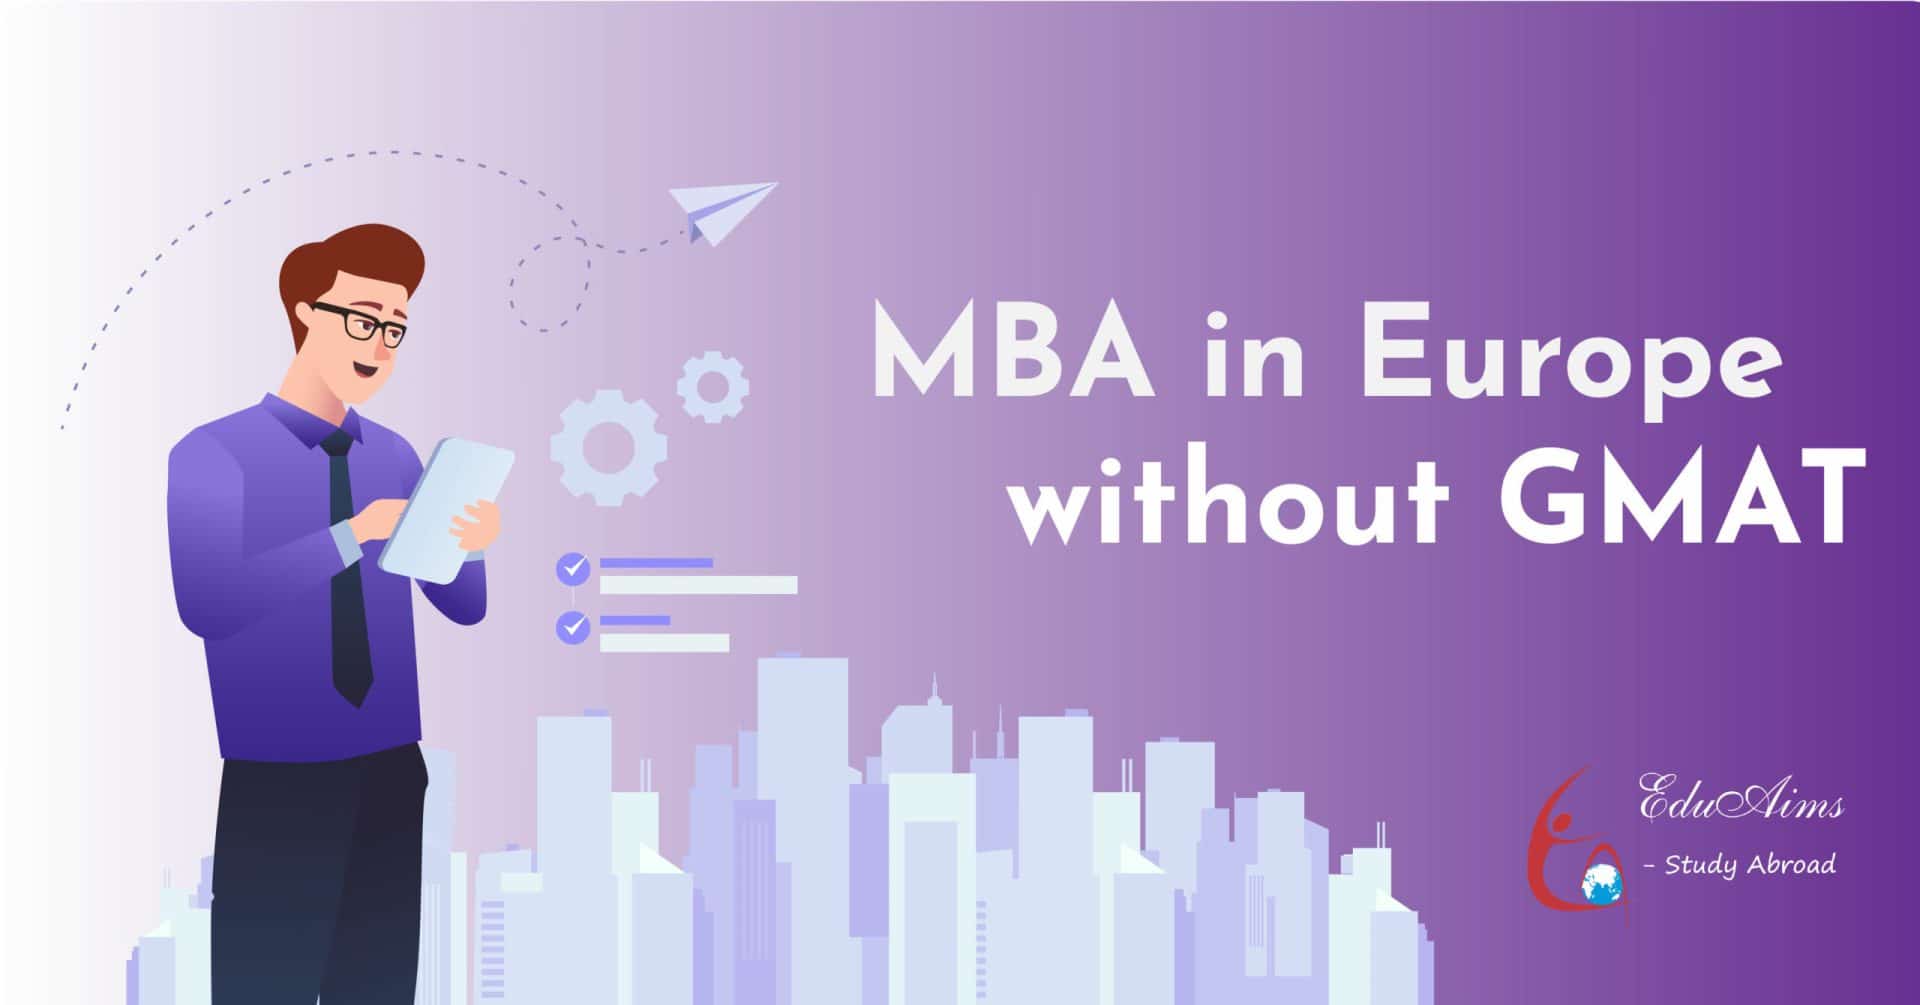 A Men standing in Europe for MBA in the Europe without GMAT